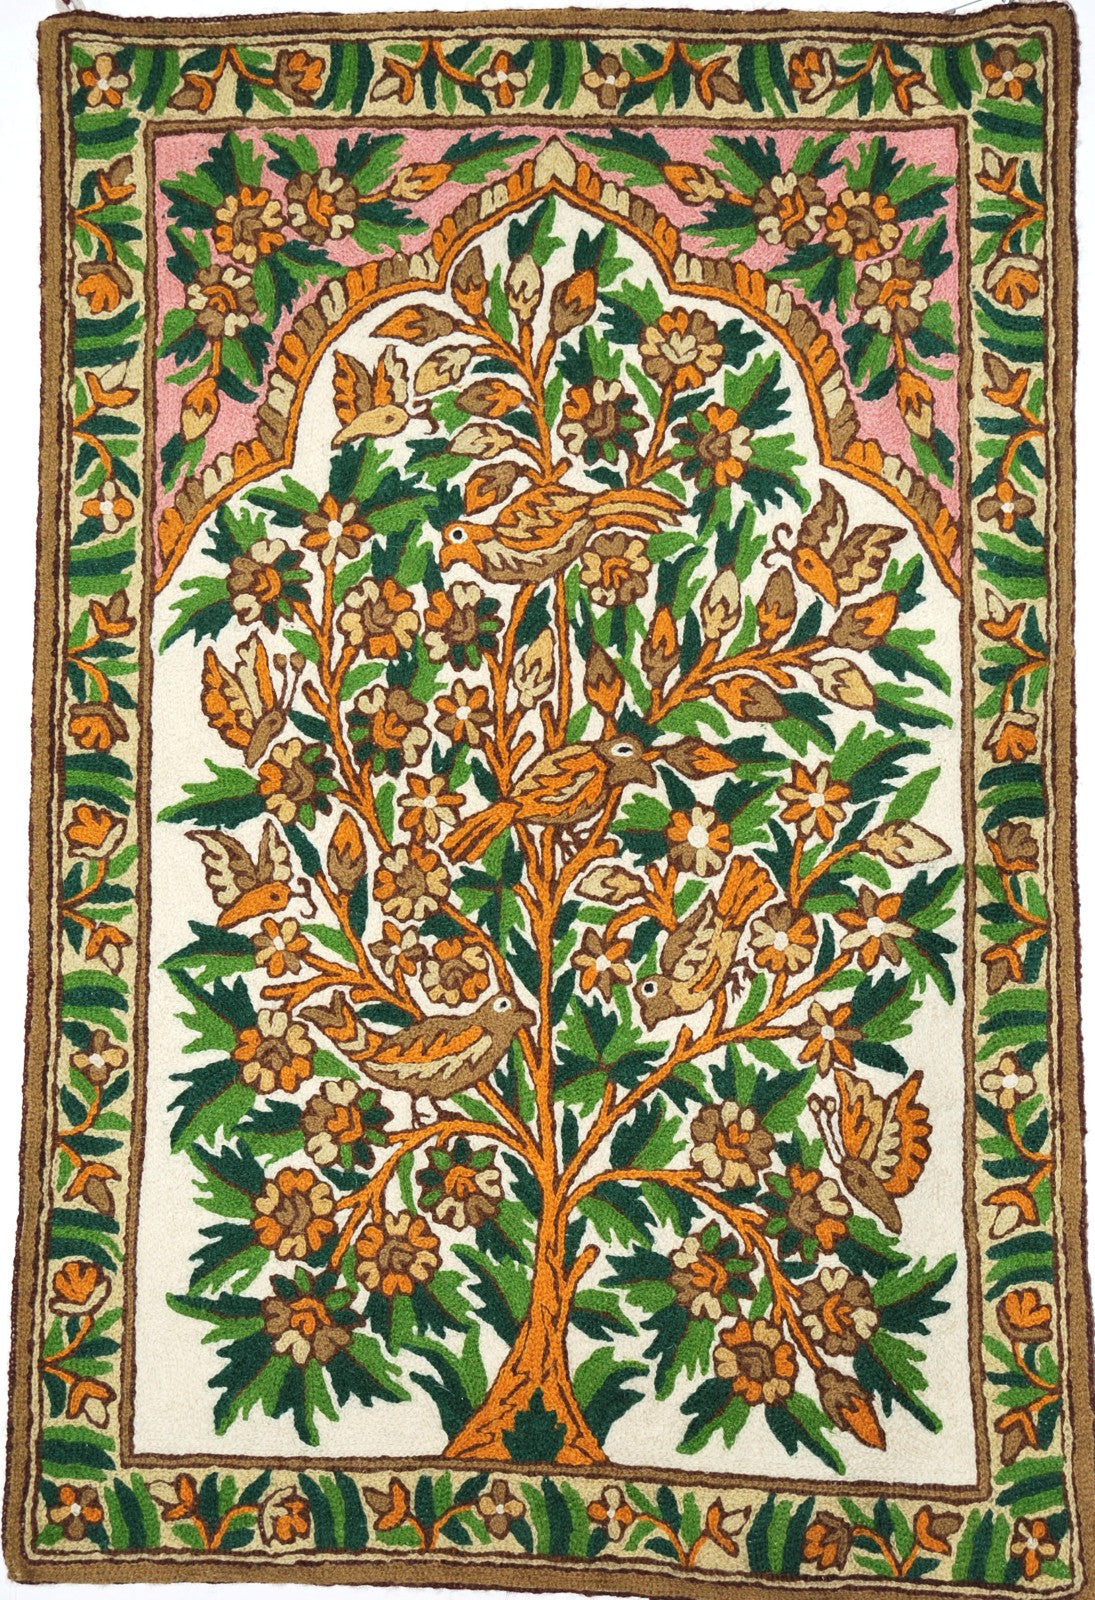 ChainStitch Tapestry Woolen Area Rug "Tree of Life Birds", Multicolor Embroidery 2x3 feet #CWR6101